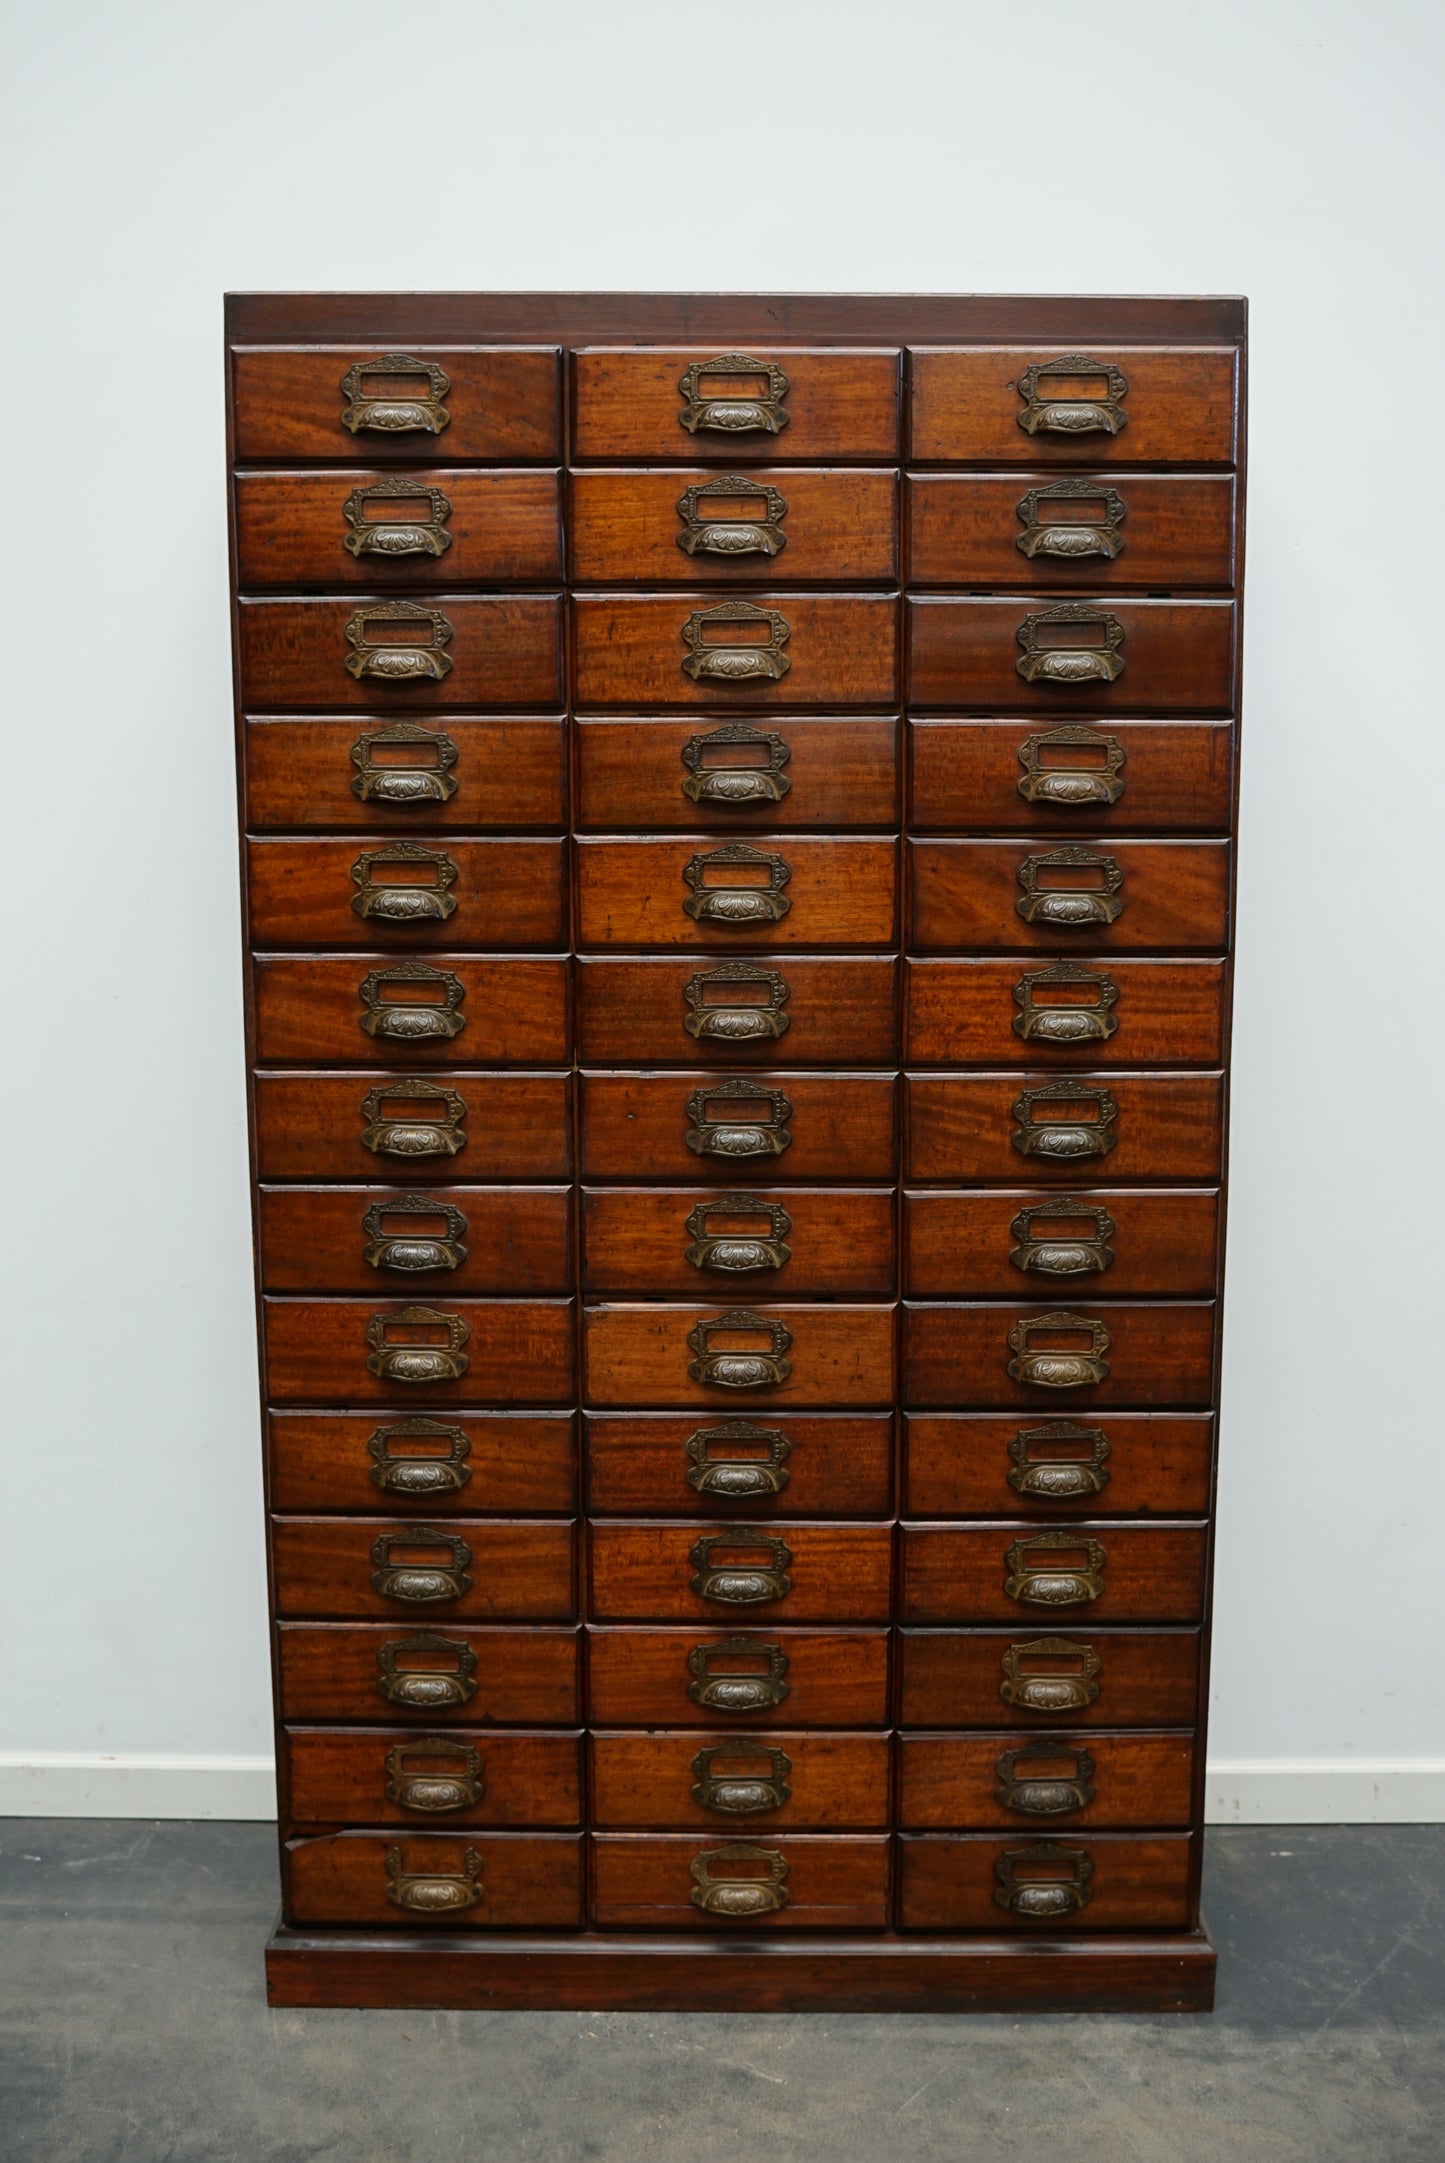 Antique French Mahogany Filing / Apothecary Cabinet by Chouanard, Ca 1900